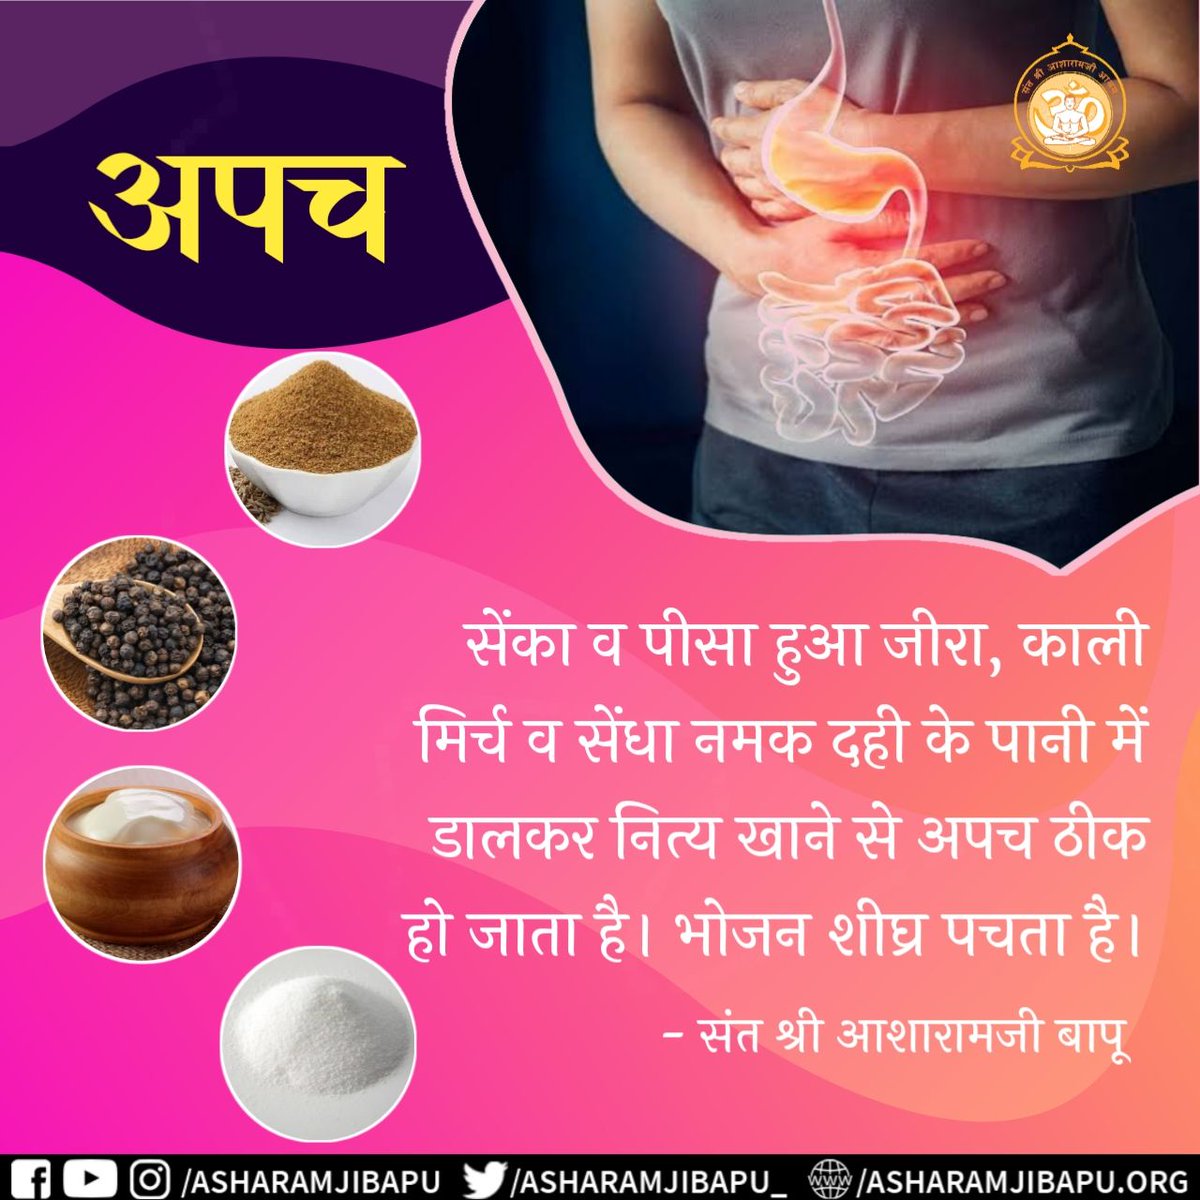 Sant Shri Asharamji Bapu explained Health Tips Science Of Ayurveda - Ayurveda is an excellent medical method, which cures diseases from the root. #स्वास्थ्य_के_नुस्खे Eating indigestion and ground cumin, black pepper and rock salt in curd water makes the food digestible.